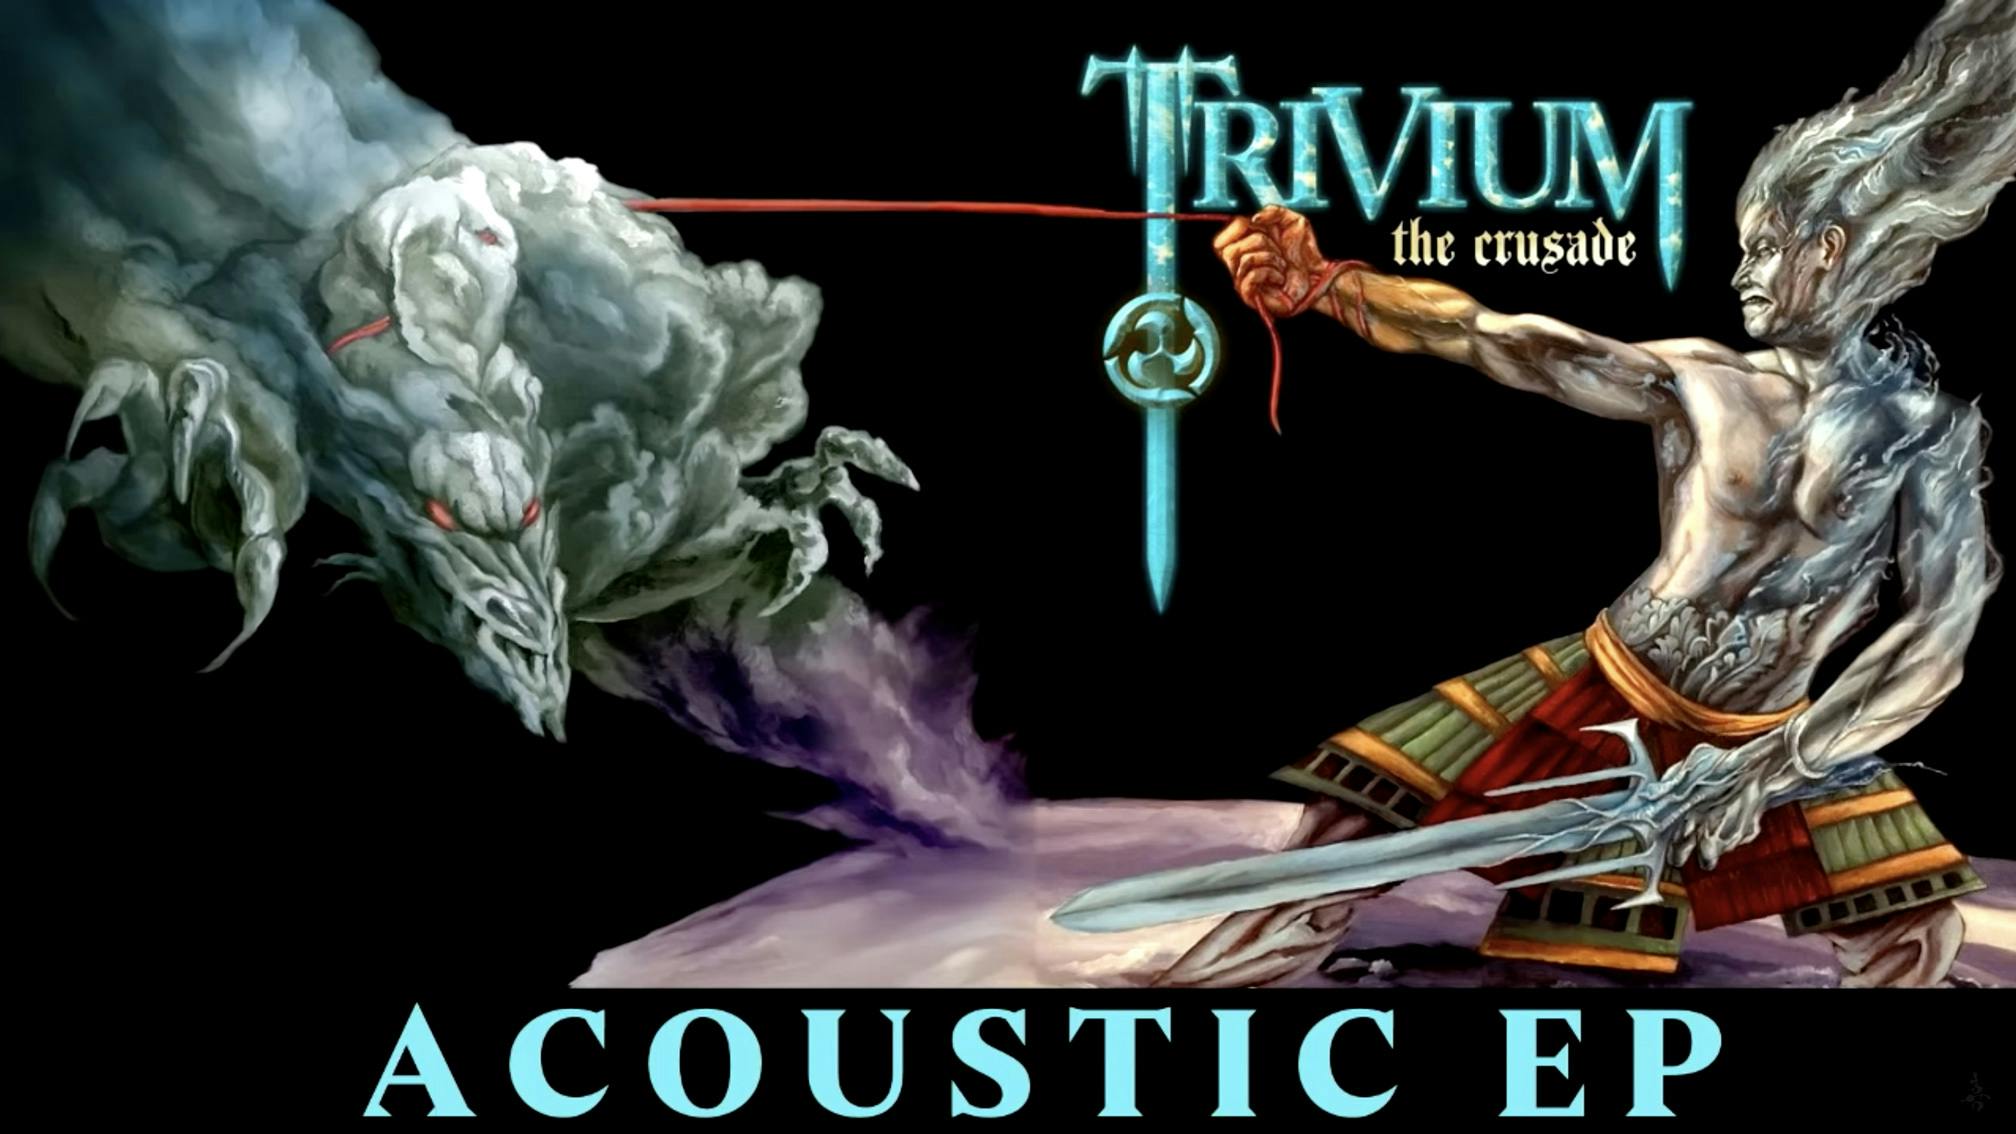 Listen to Matt Heafy's acoustic EP of songs from Trivium's The Crusade